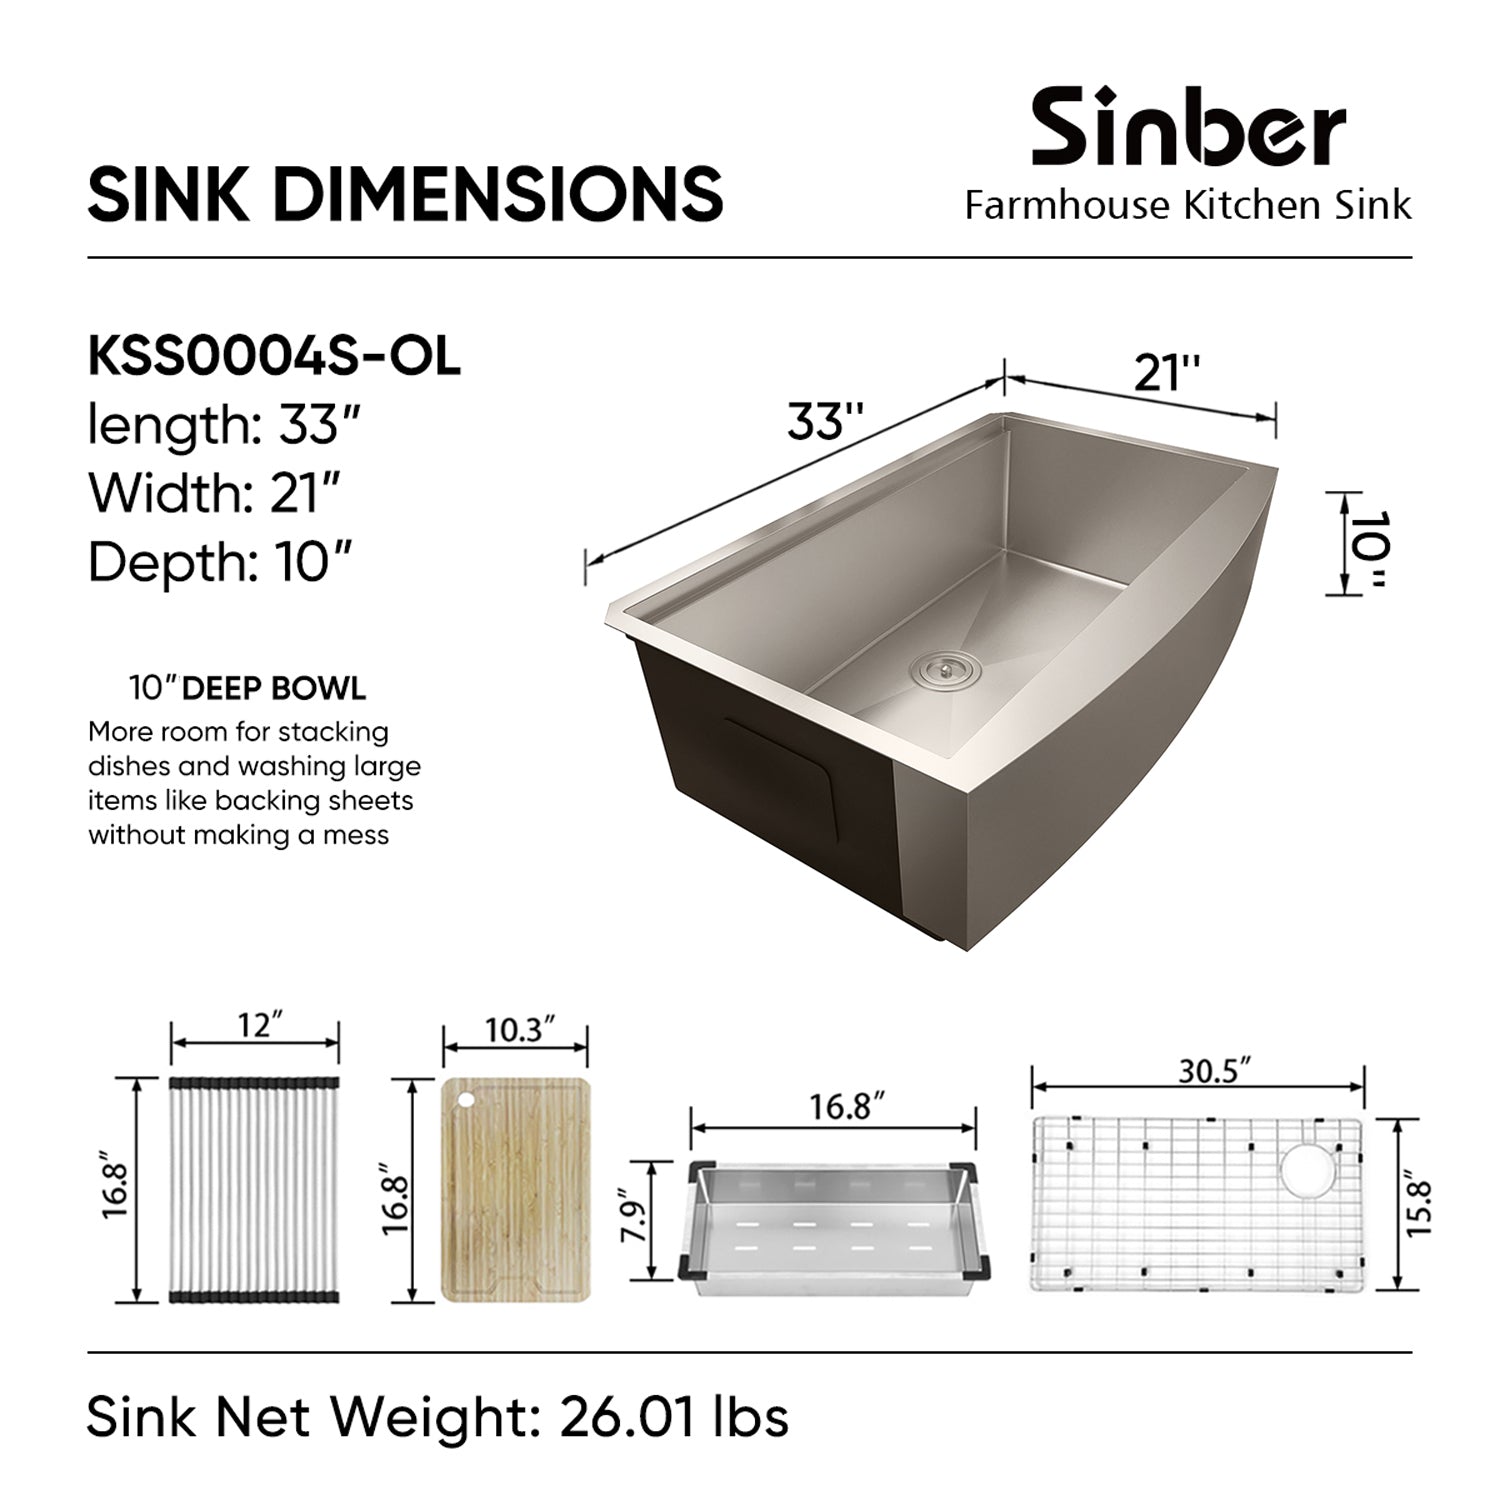 Sinber 33" x 21" x 10" Farmhouse Apron Single Bowl Workstation Kitchen Sink with 16 Gauge 304 Stainless Steel Satin Finish 6 Accessories KSS0004S-OL